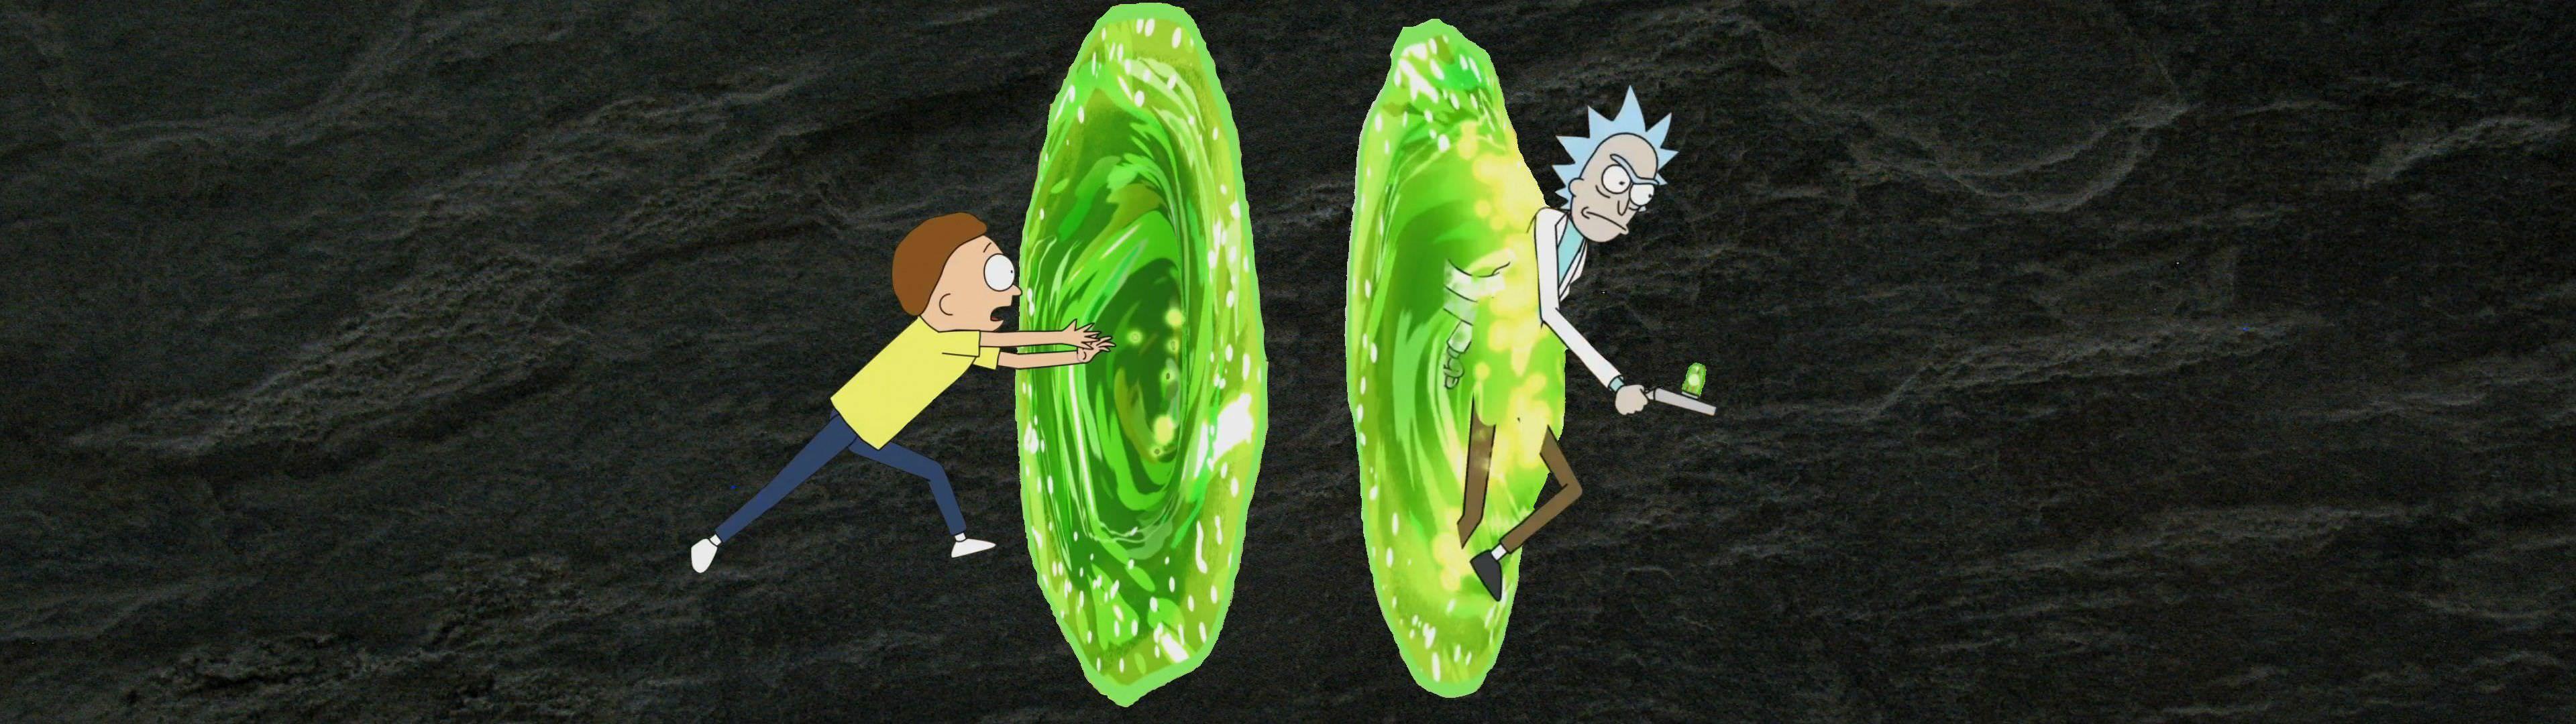 24 Rick and Morty Portal Wallpapers  Wallpaperboat